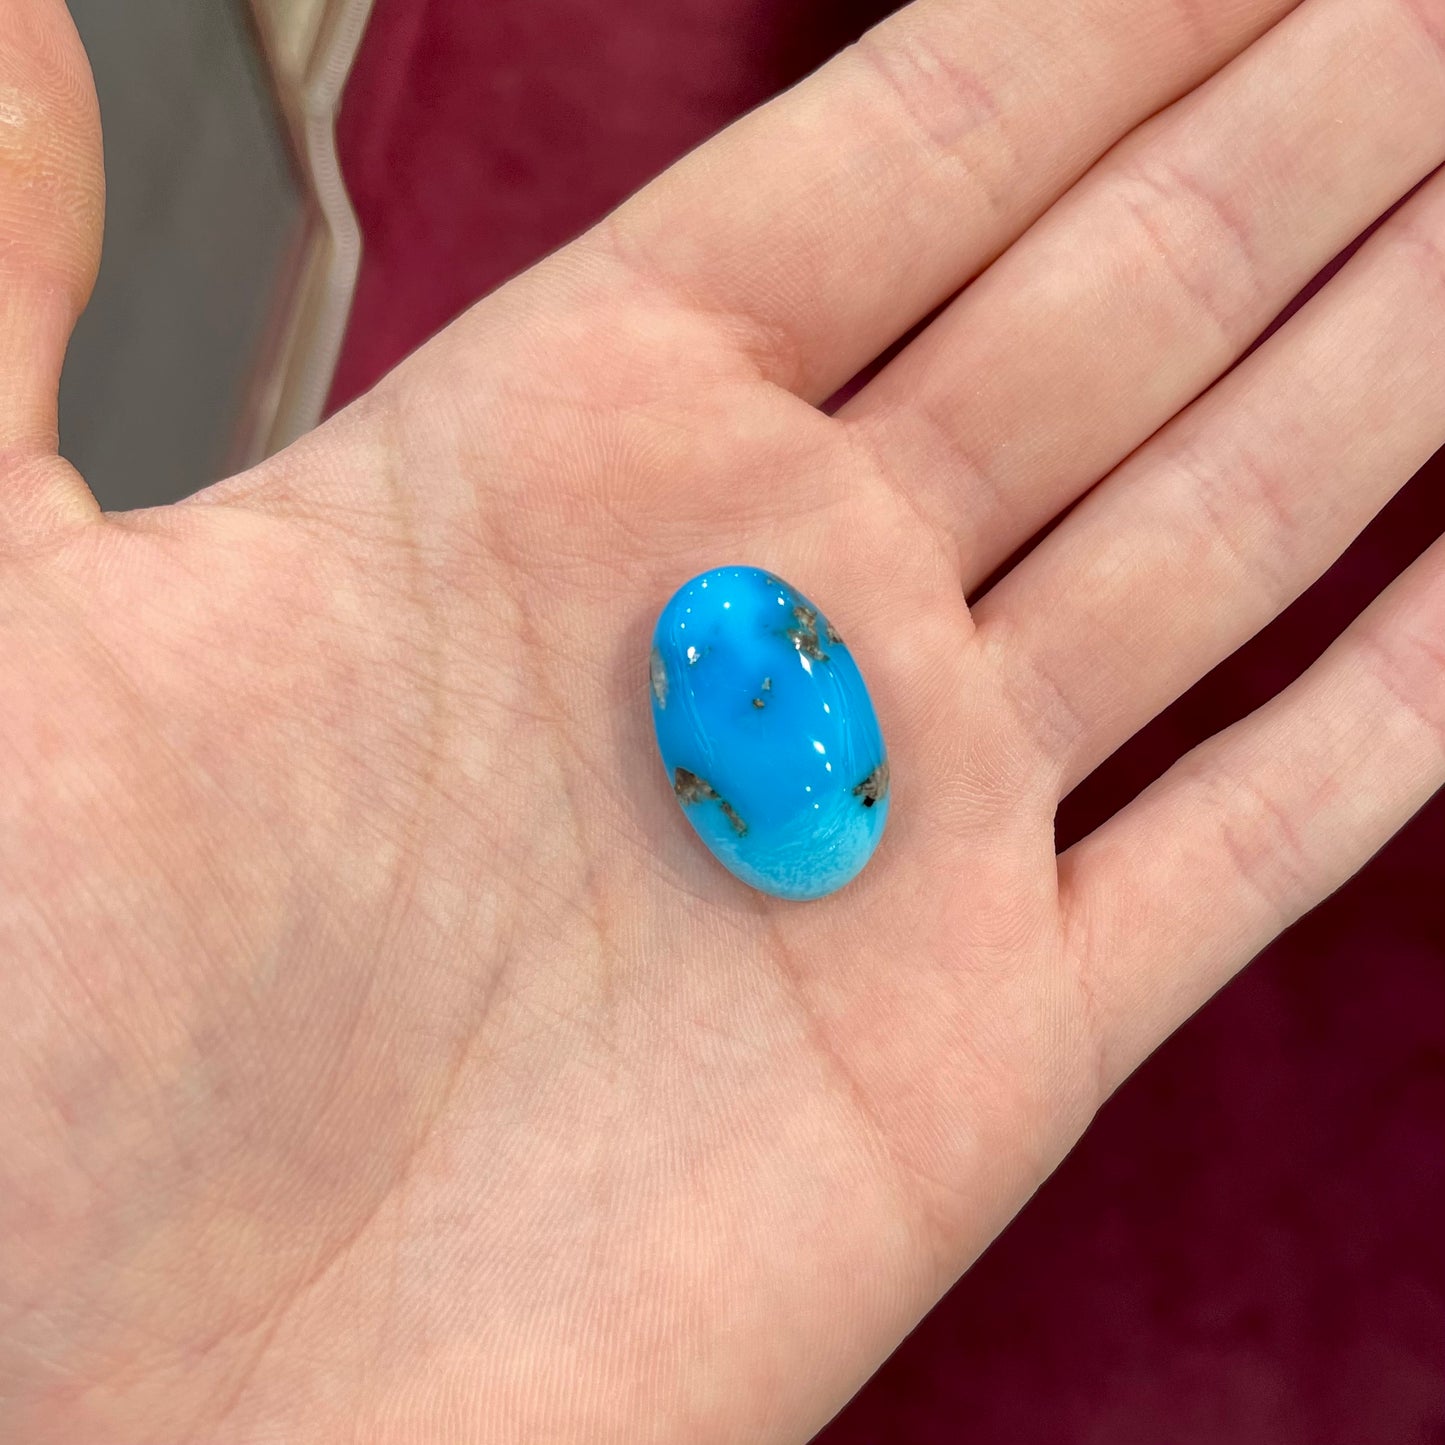 A bright blue Sleeping Beauty turquoise cabochon.